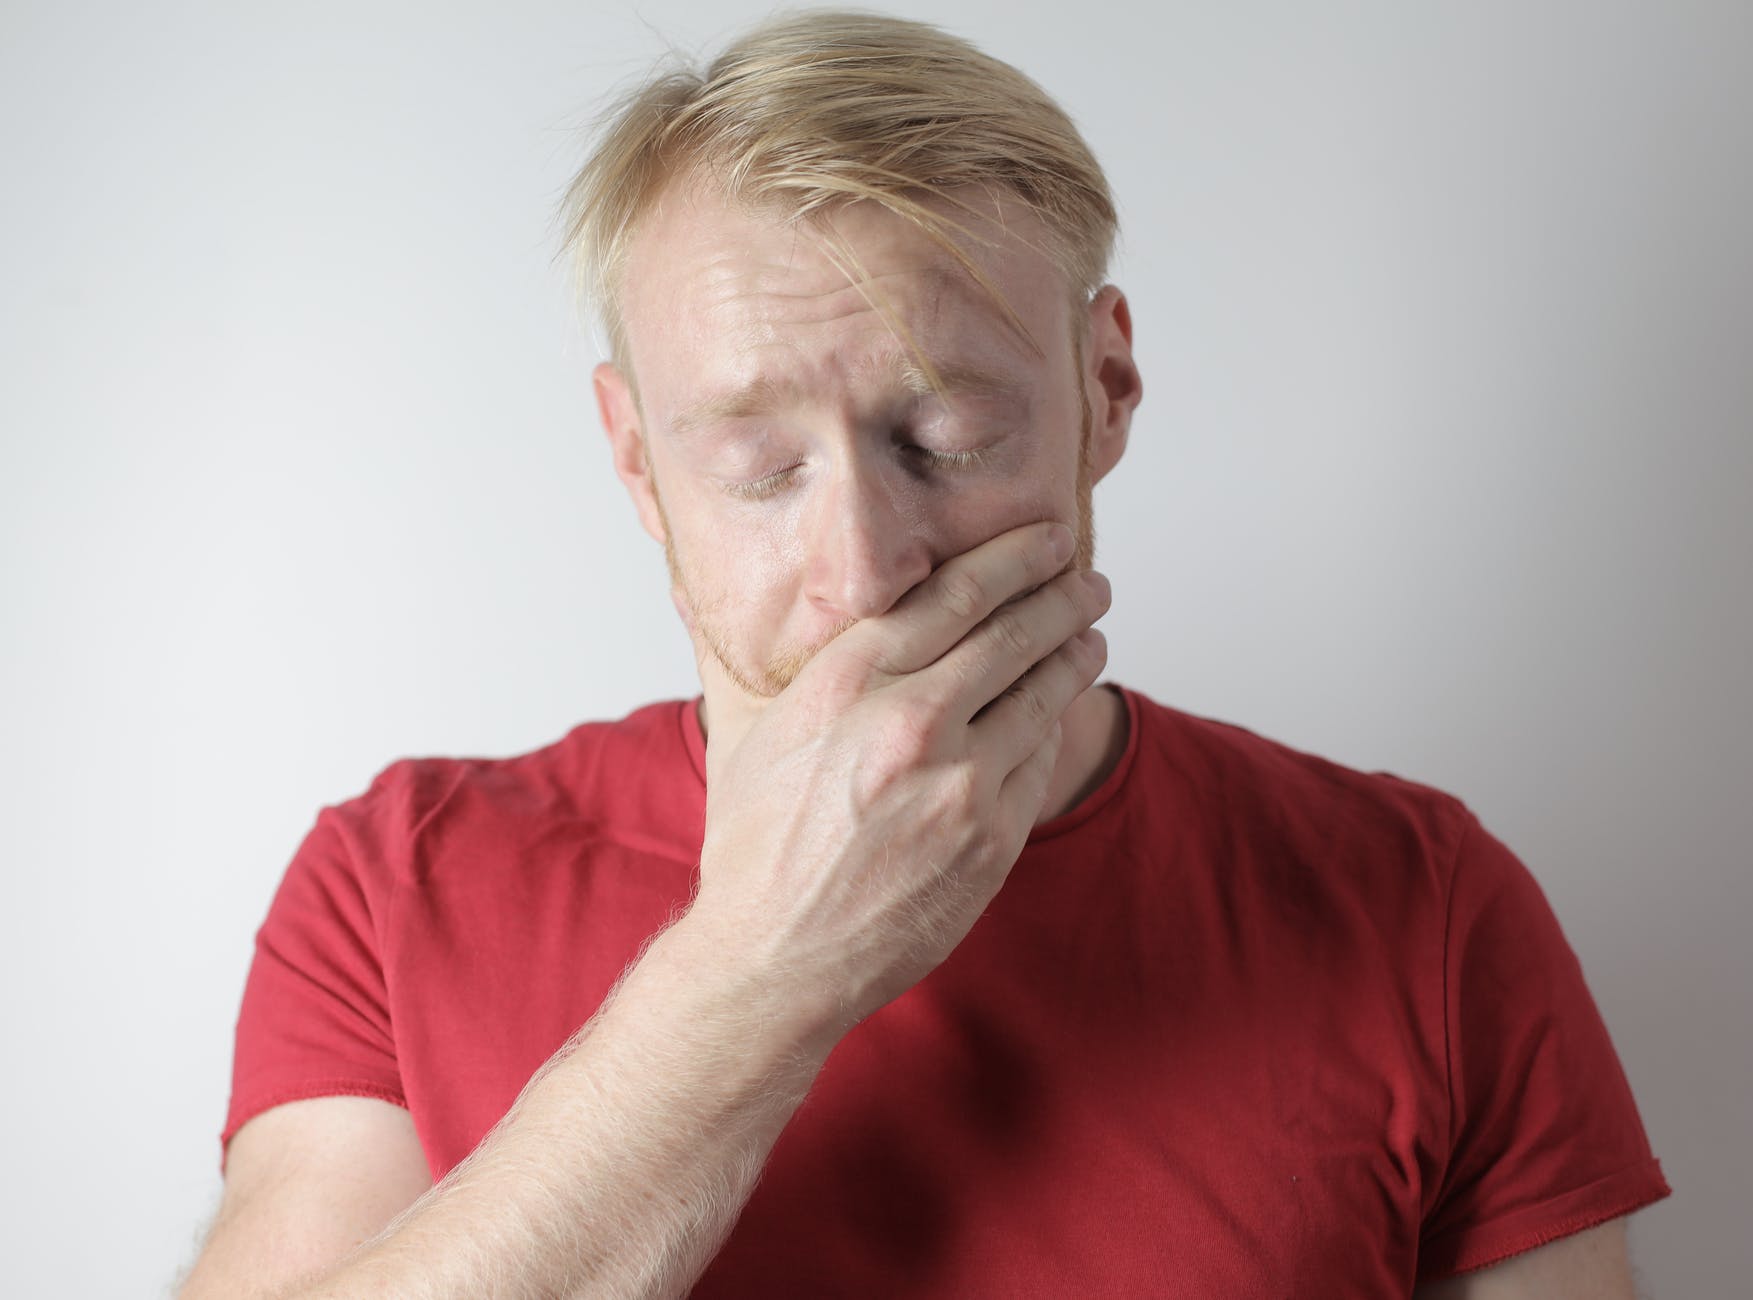 What to do when you have oral pain and discomfort